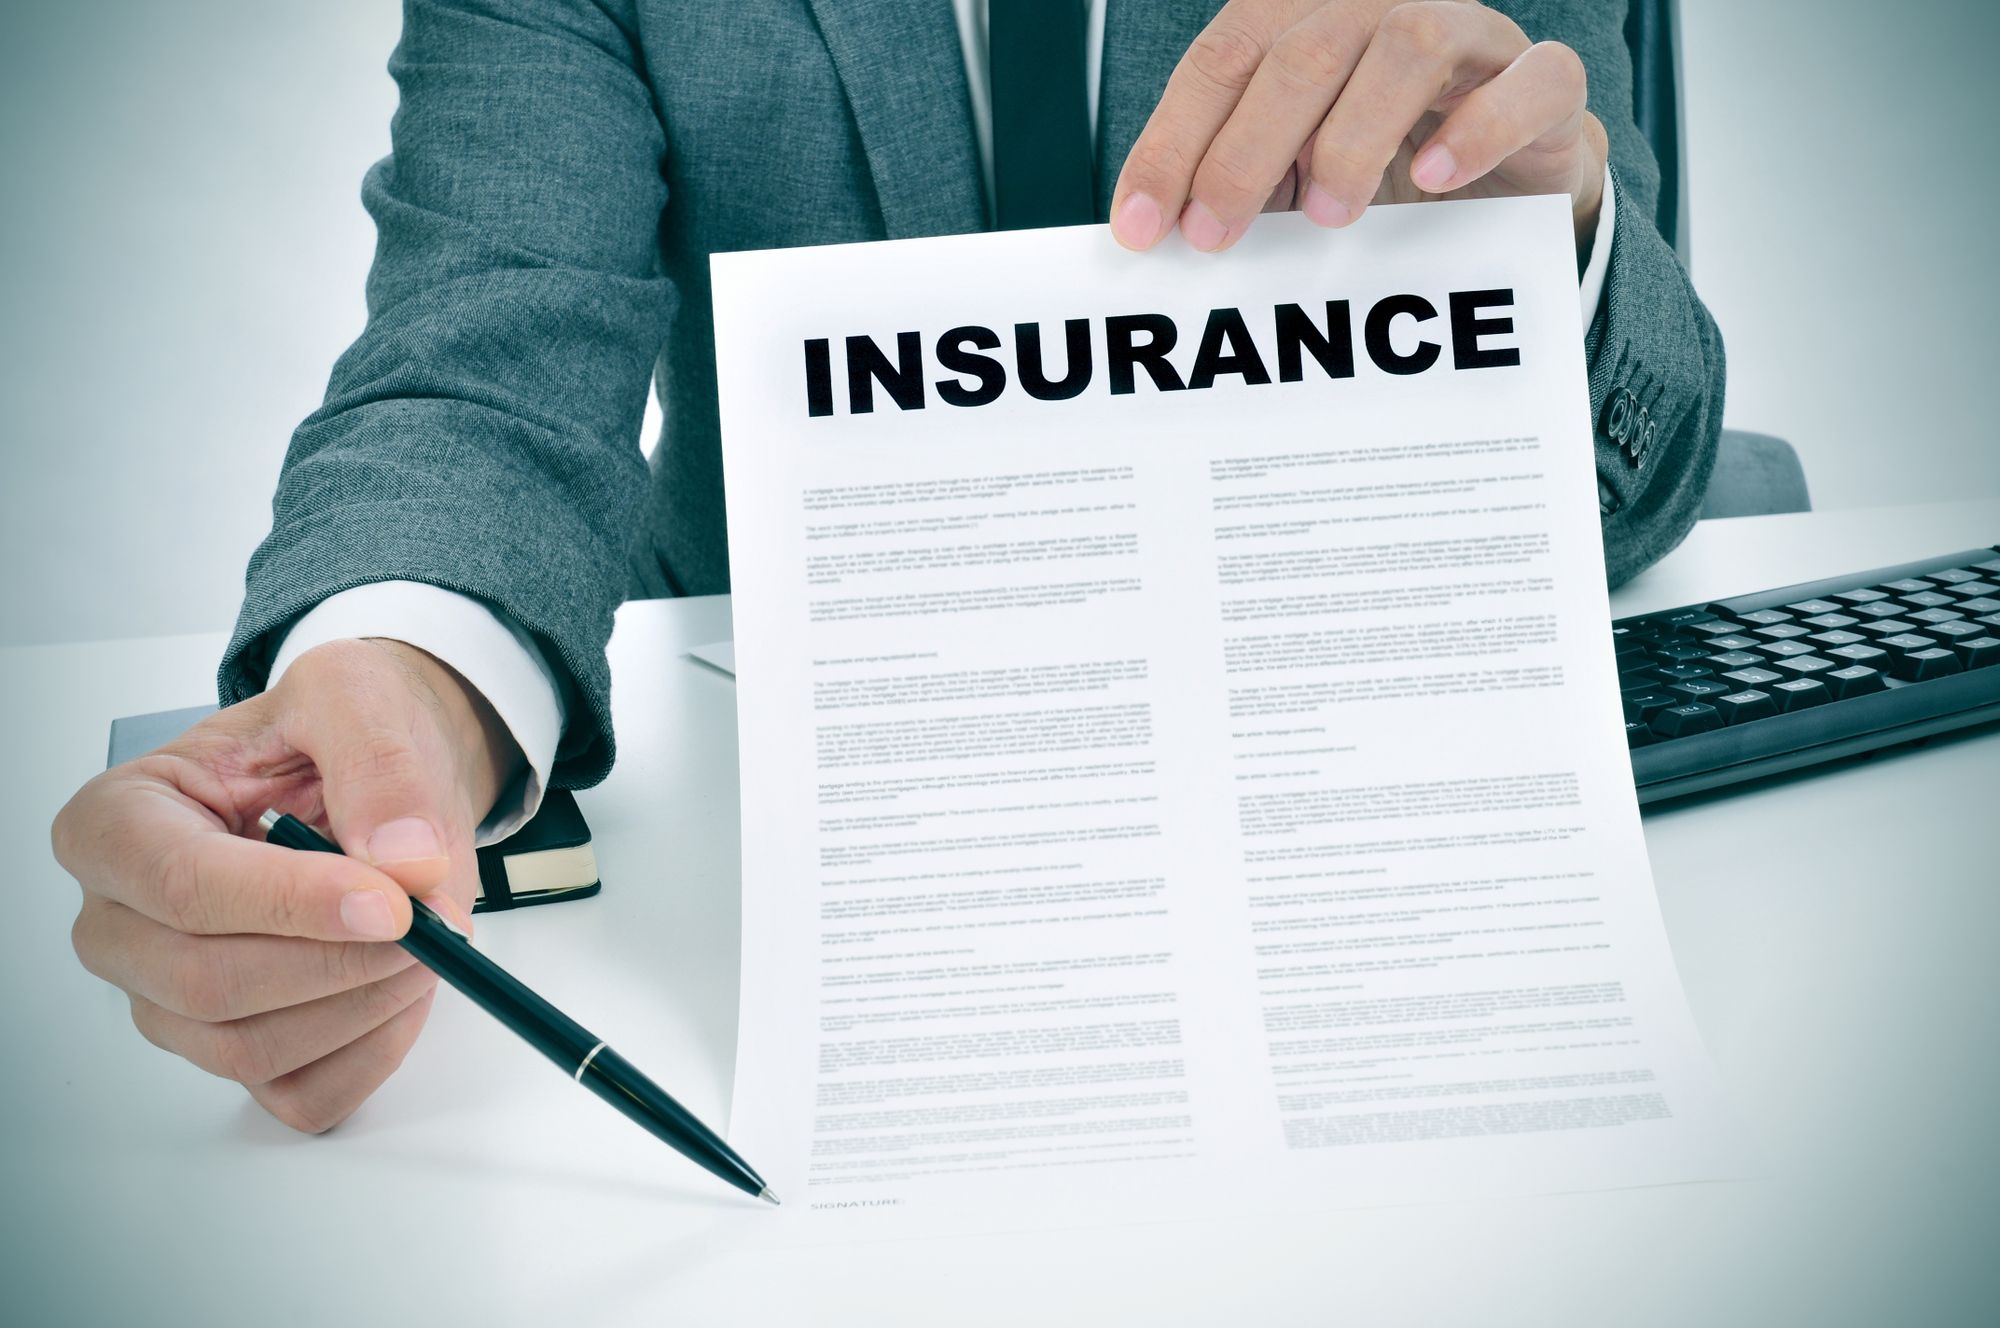 Insurance policy by nito | www.shutterstock.com